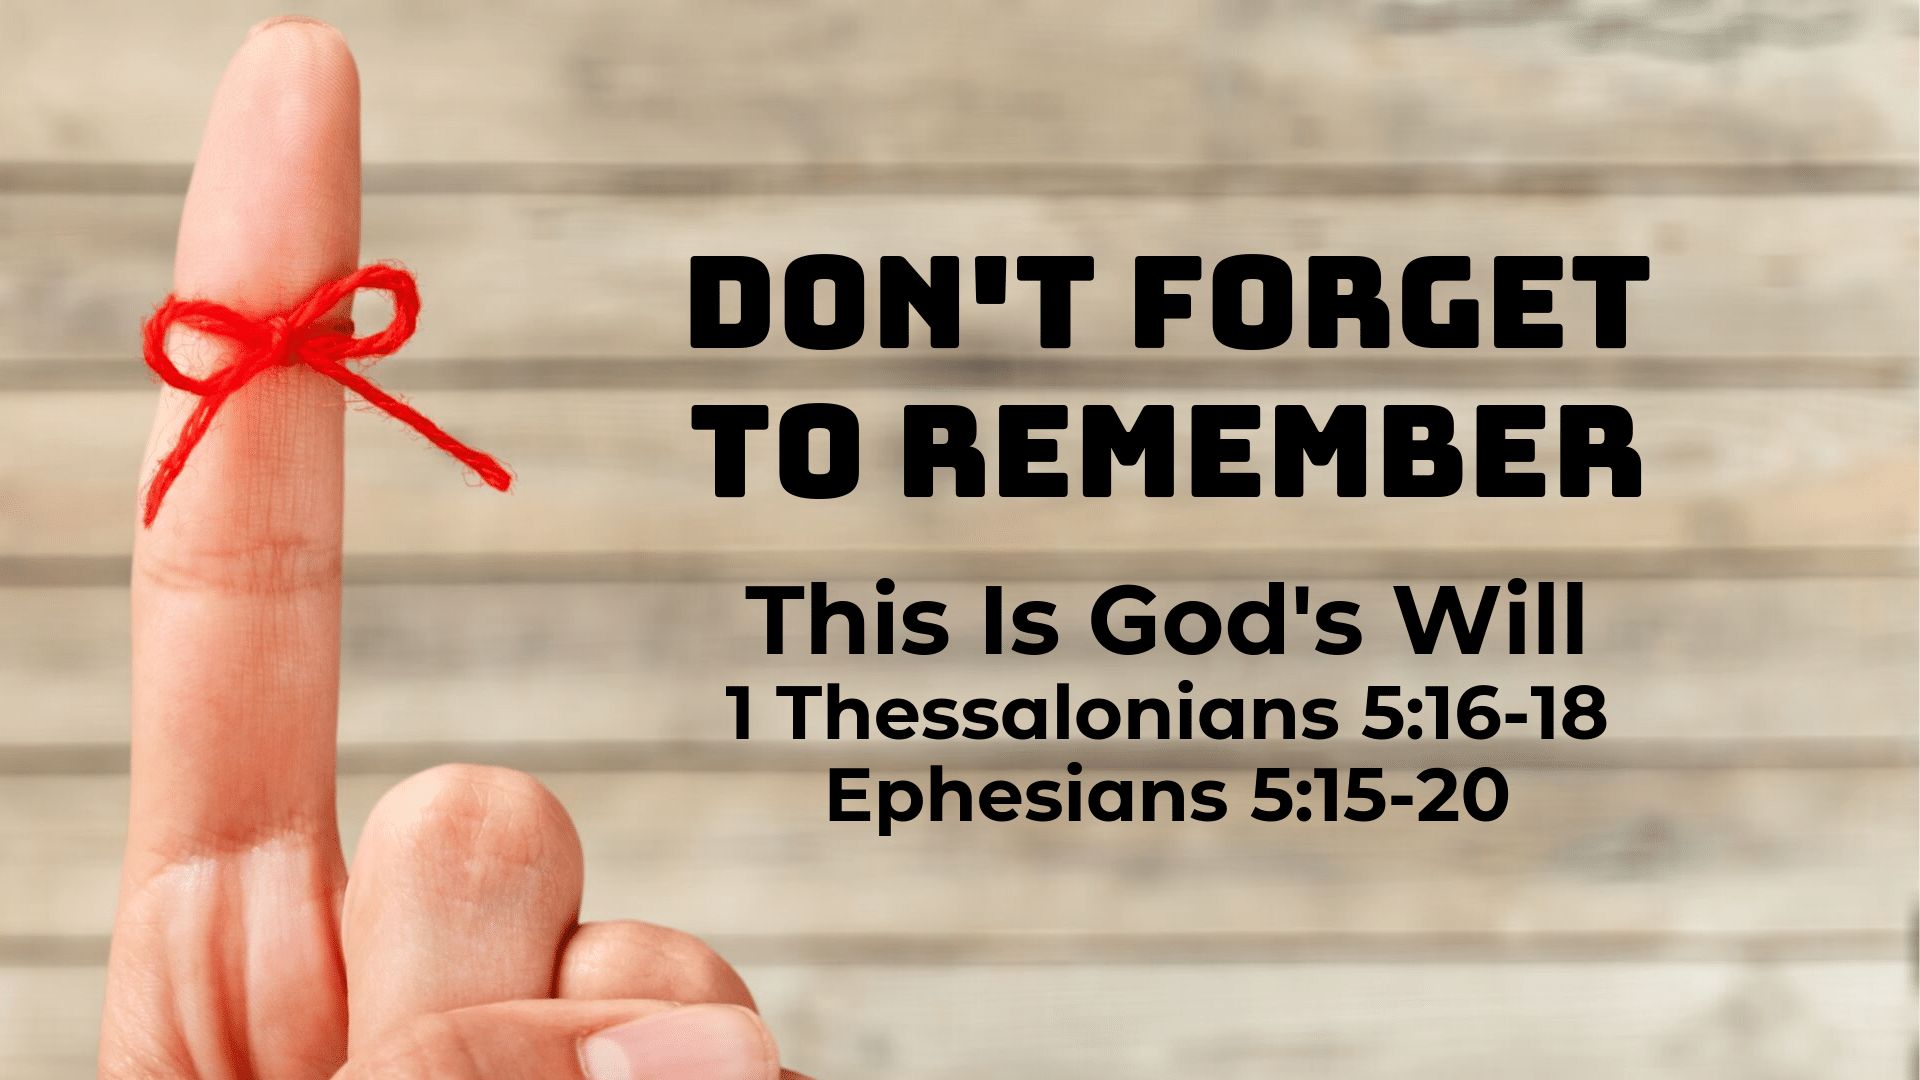 Don’t Forget To Remember: This Is God’s Will